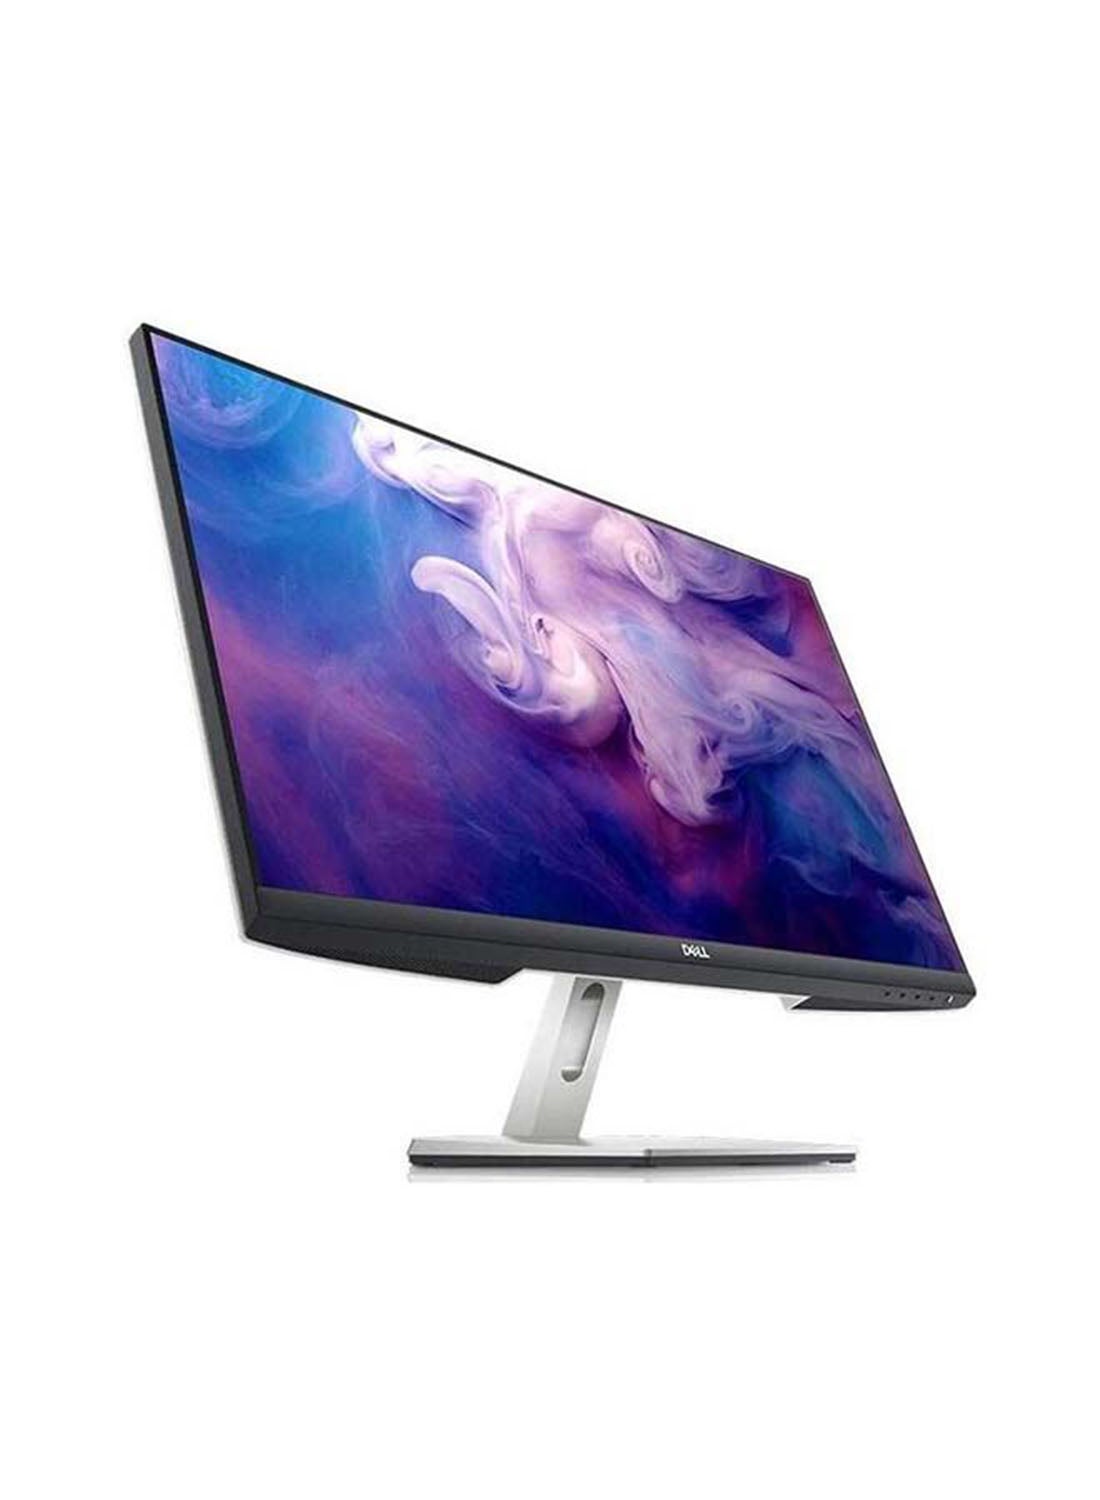 27 inch  Monitor S2721HN in Plane Switching IPS, Flicker Free Screen with Comfort View, Full HD 1080p 1920 x 1080 at 75 Hz with AMD Free Sync, with Dual HDMI Ports, 3 Sided Ultrathin Silver 